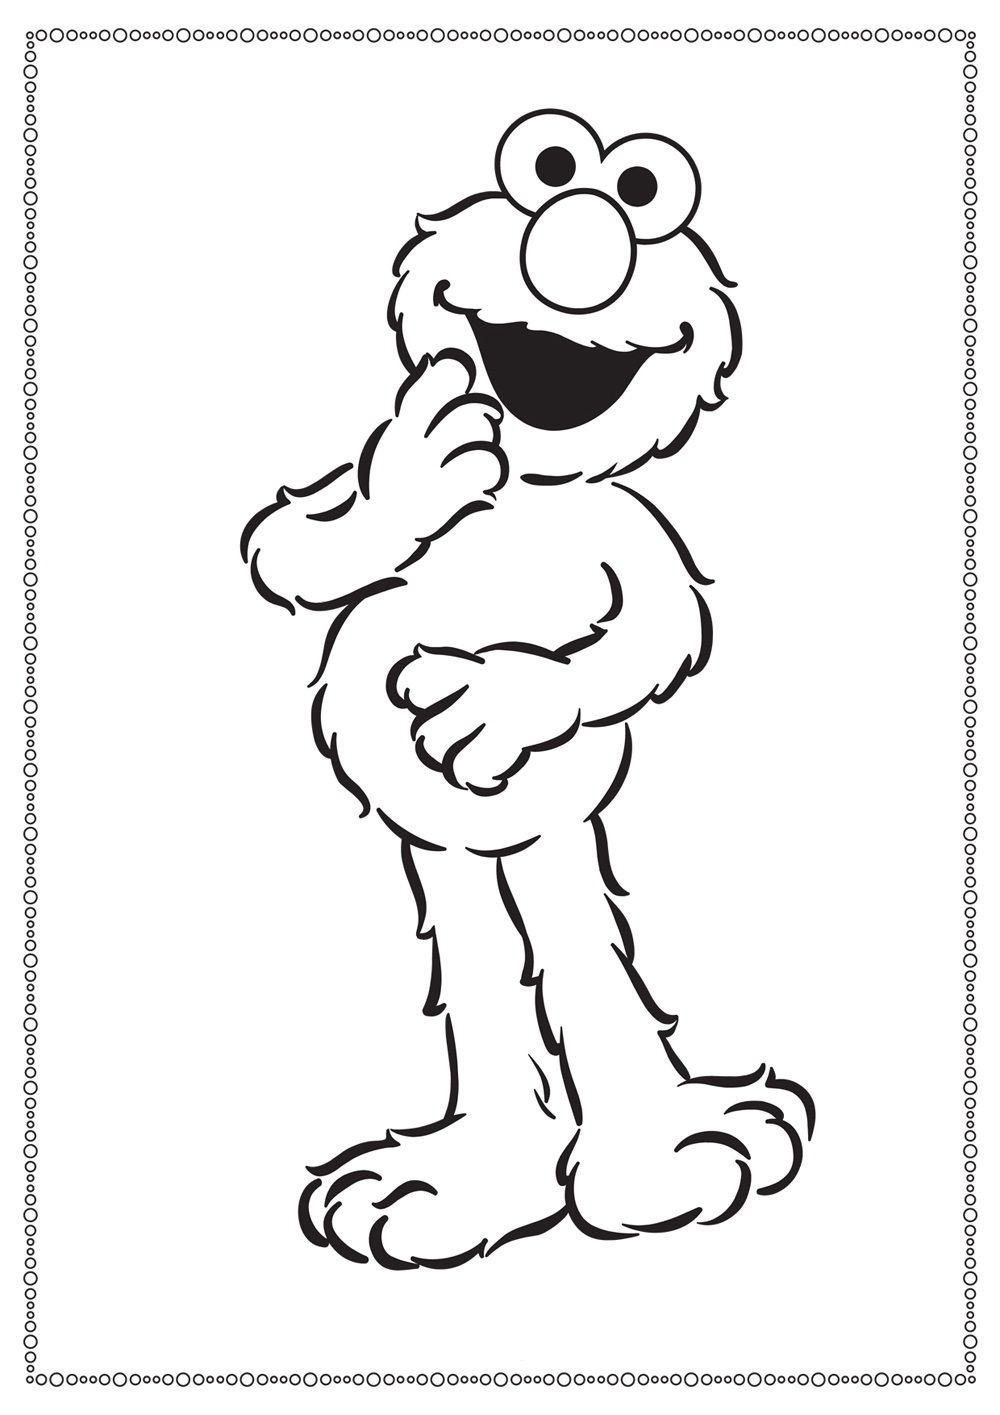 Free Printable Elmo Coloring Pages For Kids | Diy | Elmo Coloring - Free Printable Sesame Street Coloring Pages